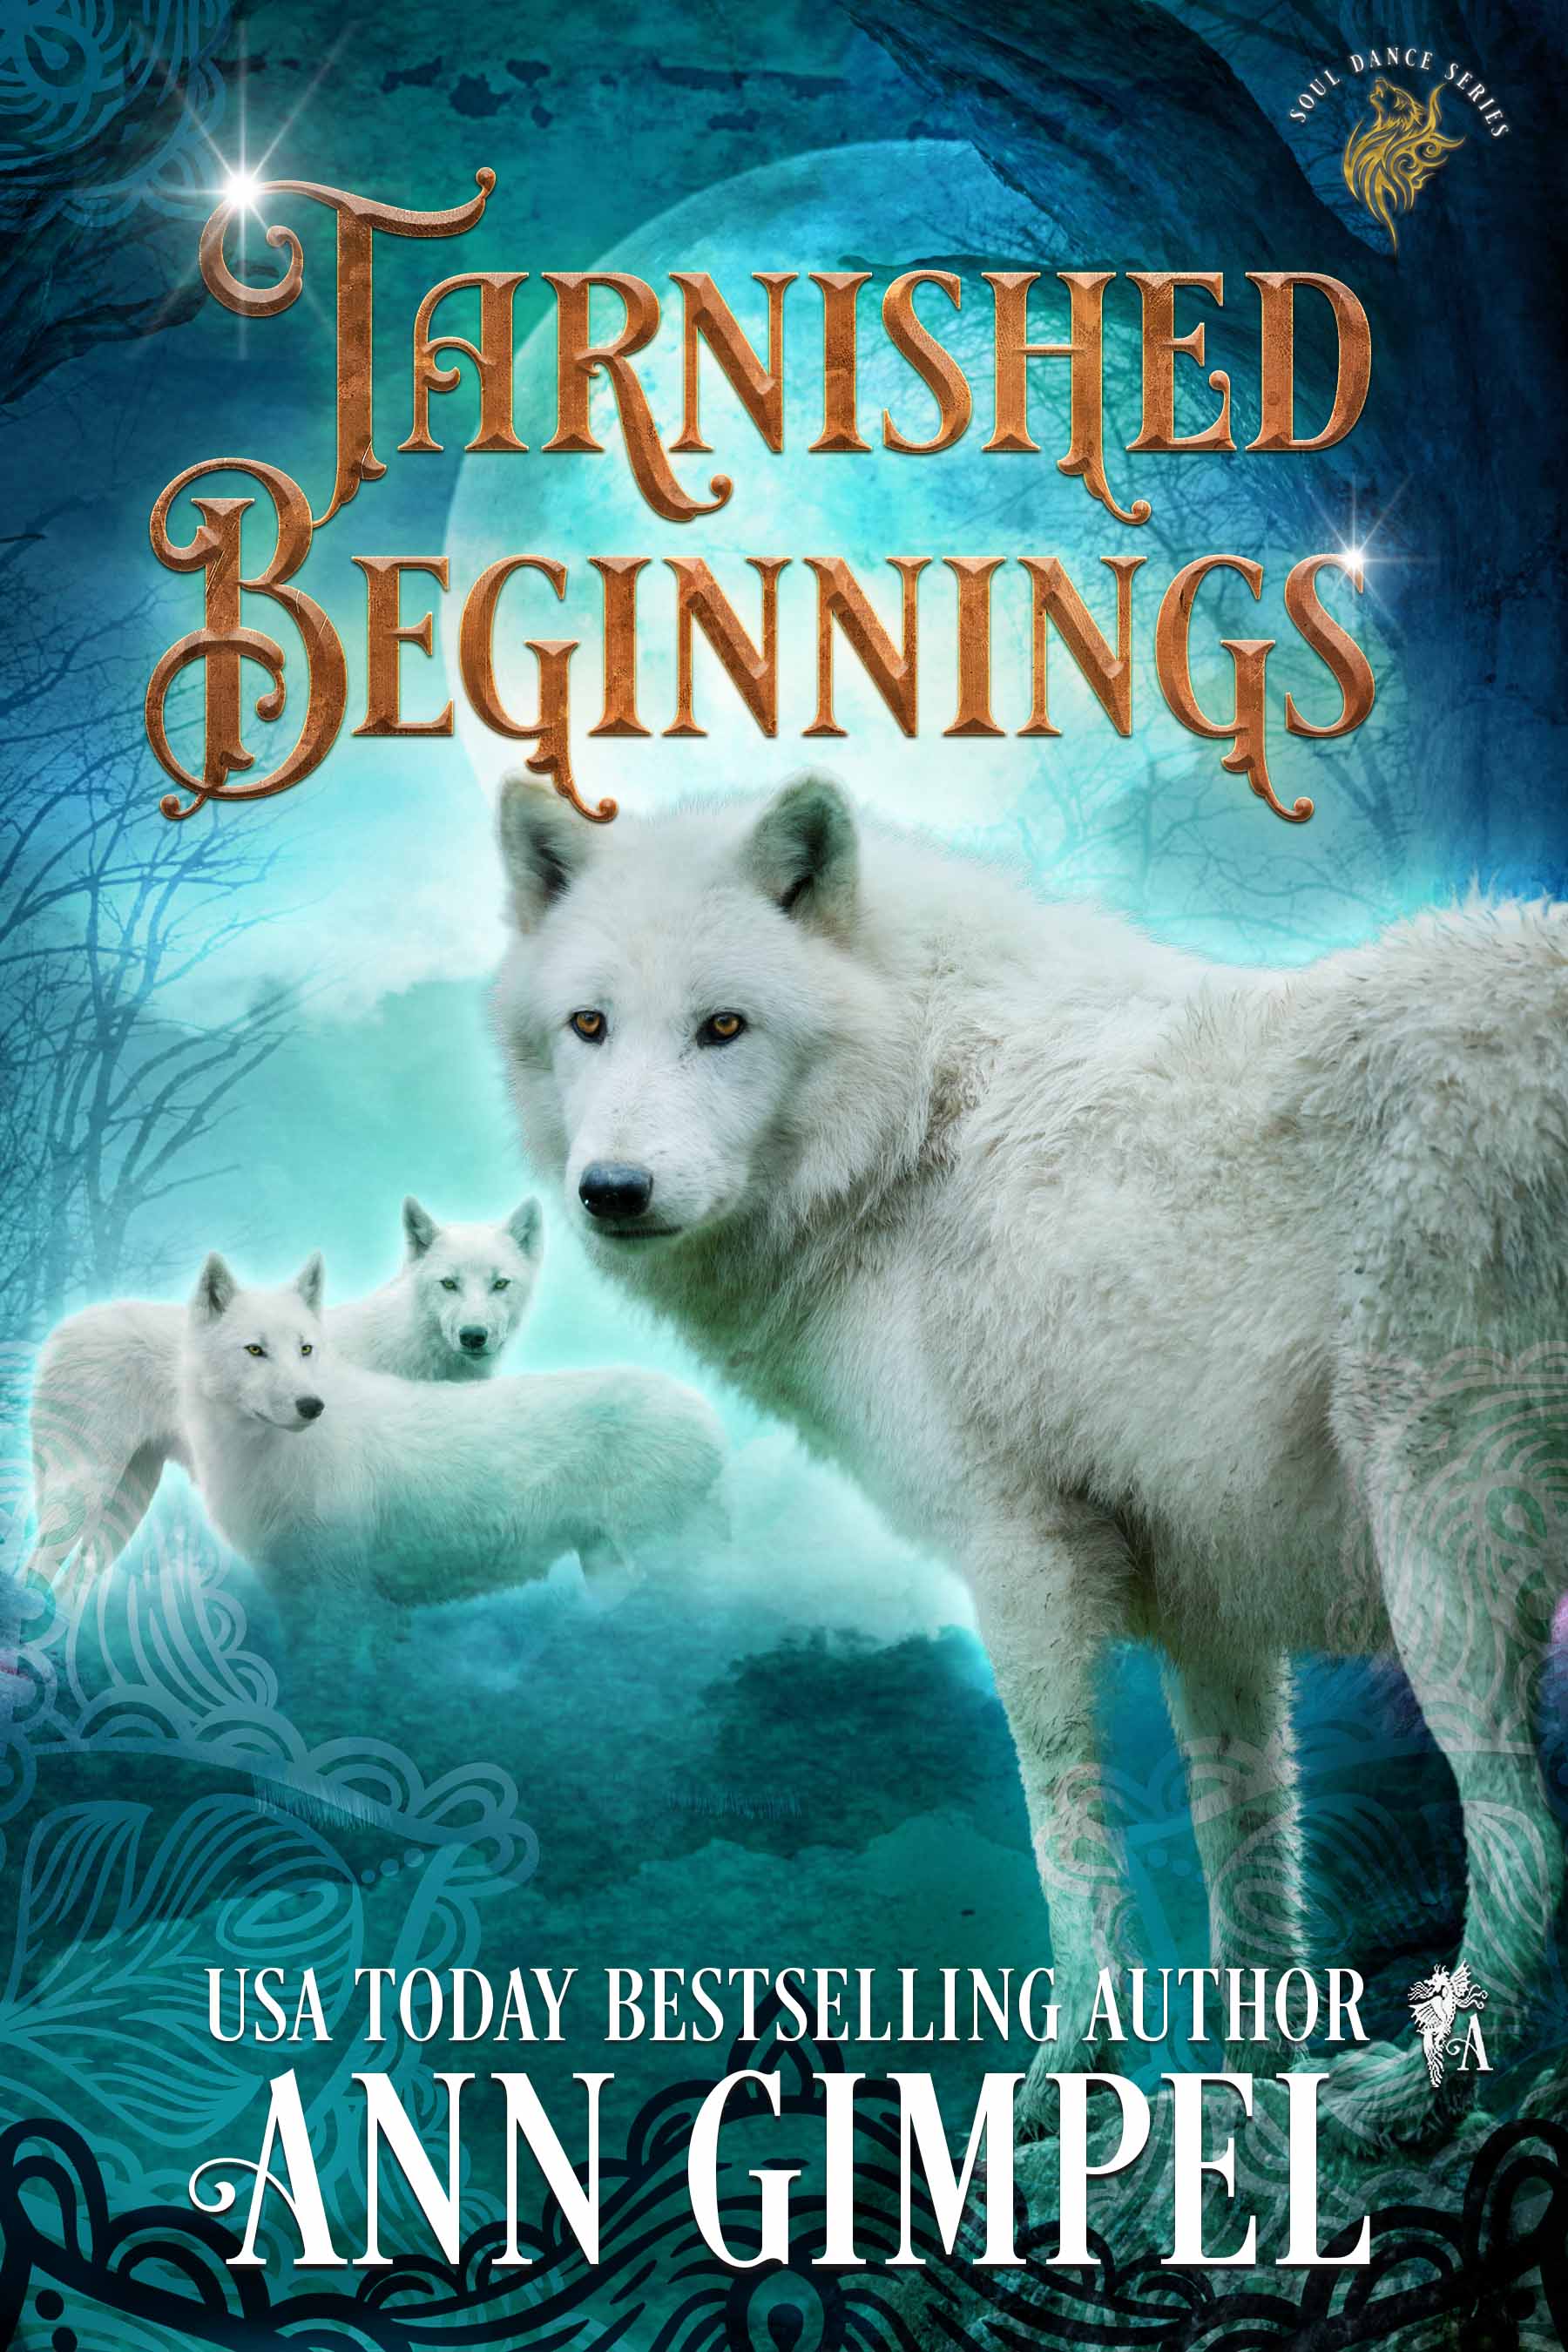 Tarnished Beginnings, Soul Dance Book One